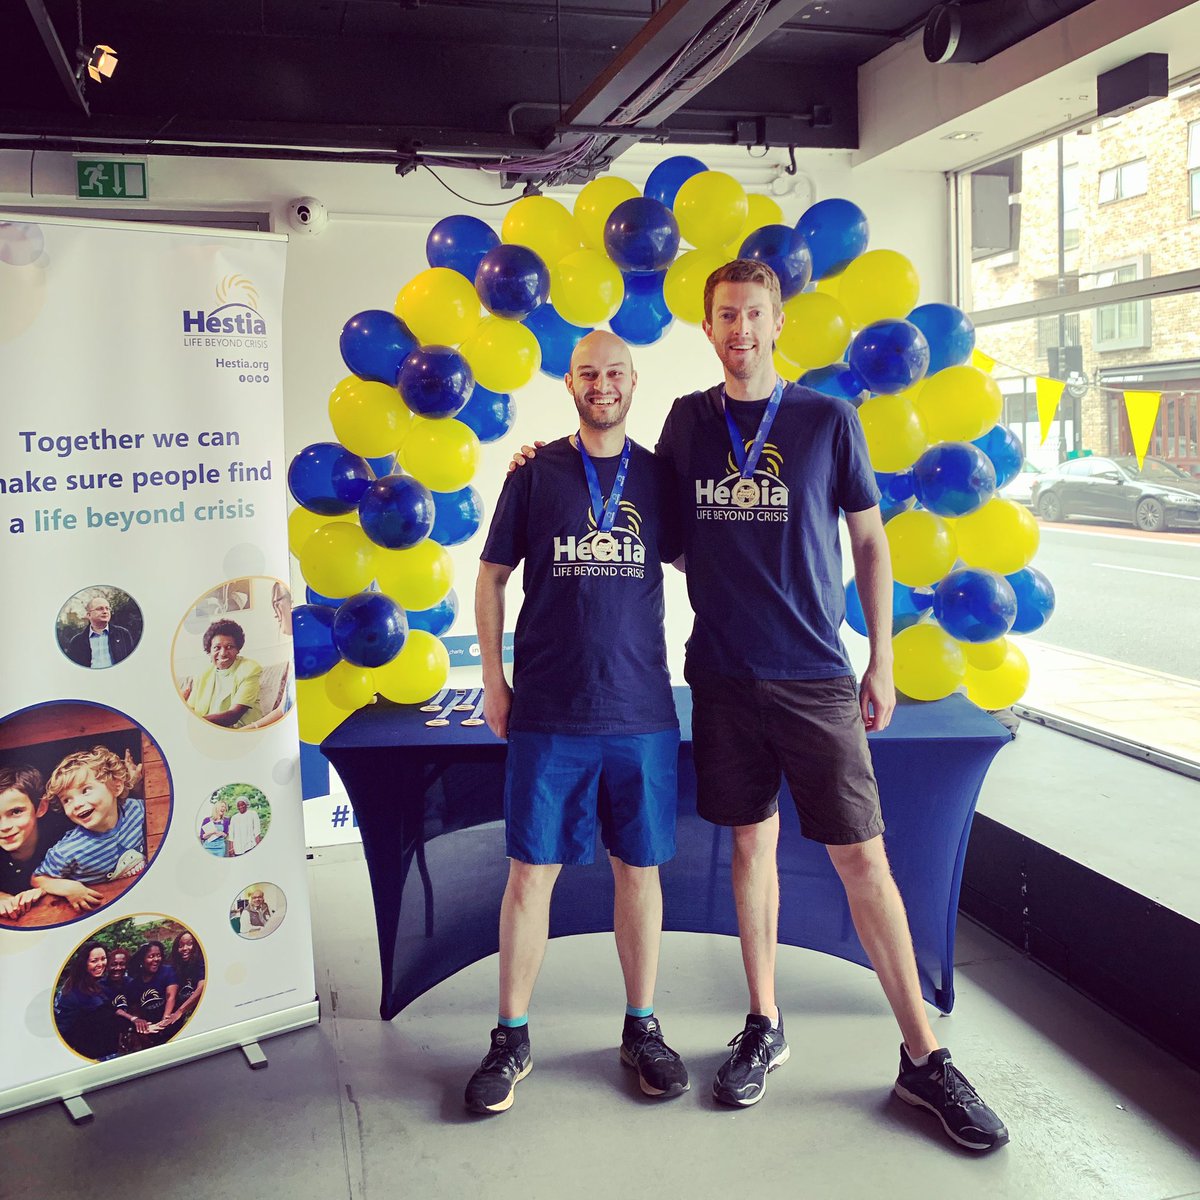 Me and my colleague Andrew raised £1896 for @Hestia1970 by completing the #Race2Safety challenge trekking across London to raise awareness and donations for families that use Hestia’s #DomesticAbuse services. Thanks to all who sponsored us and congrats to the other teams! 🏃🏼